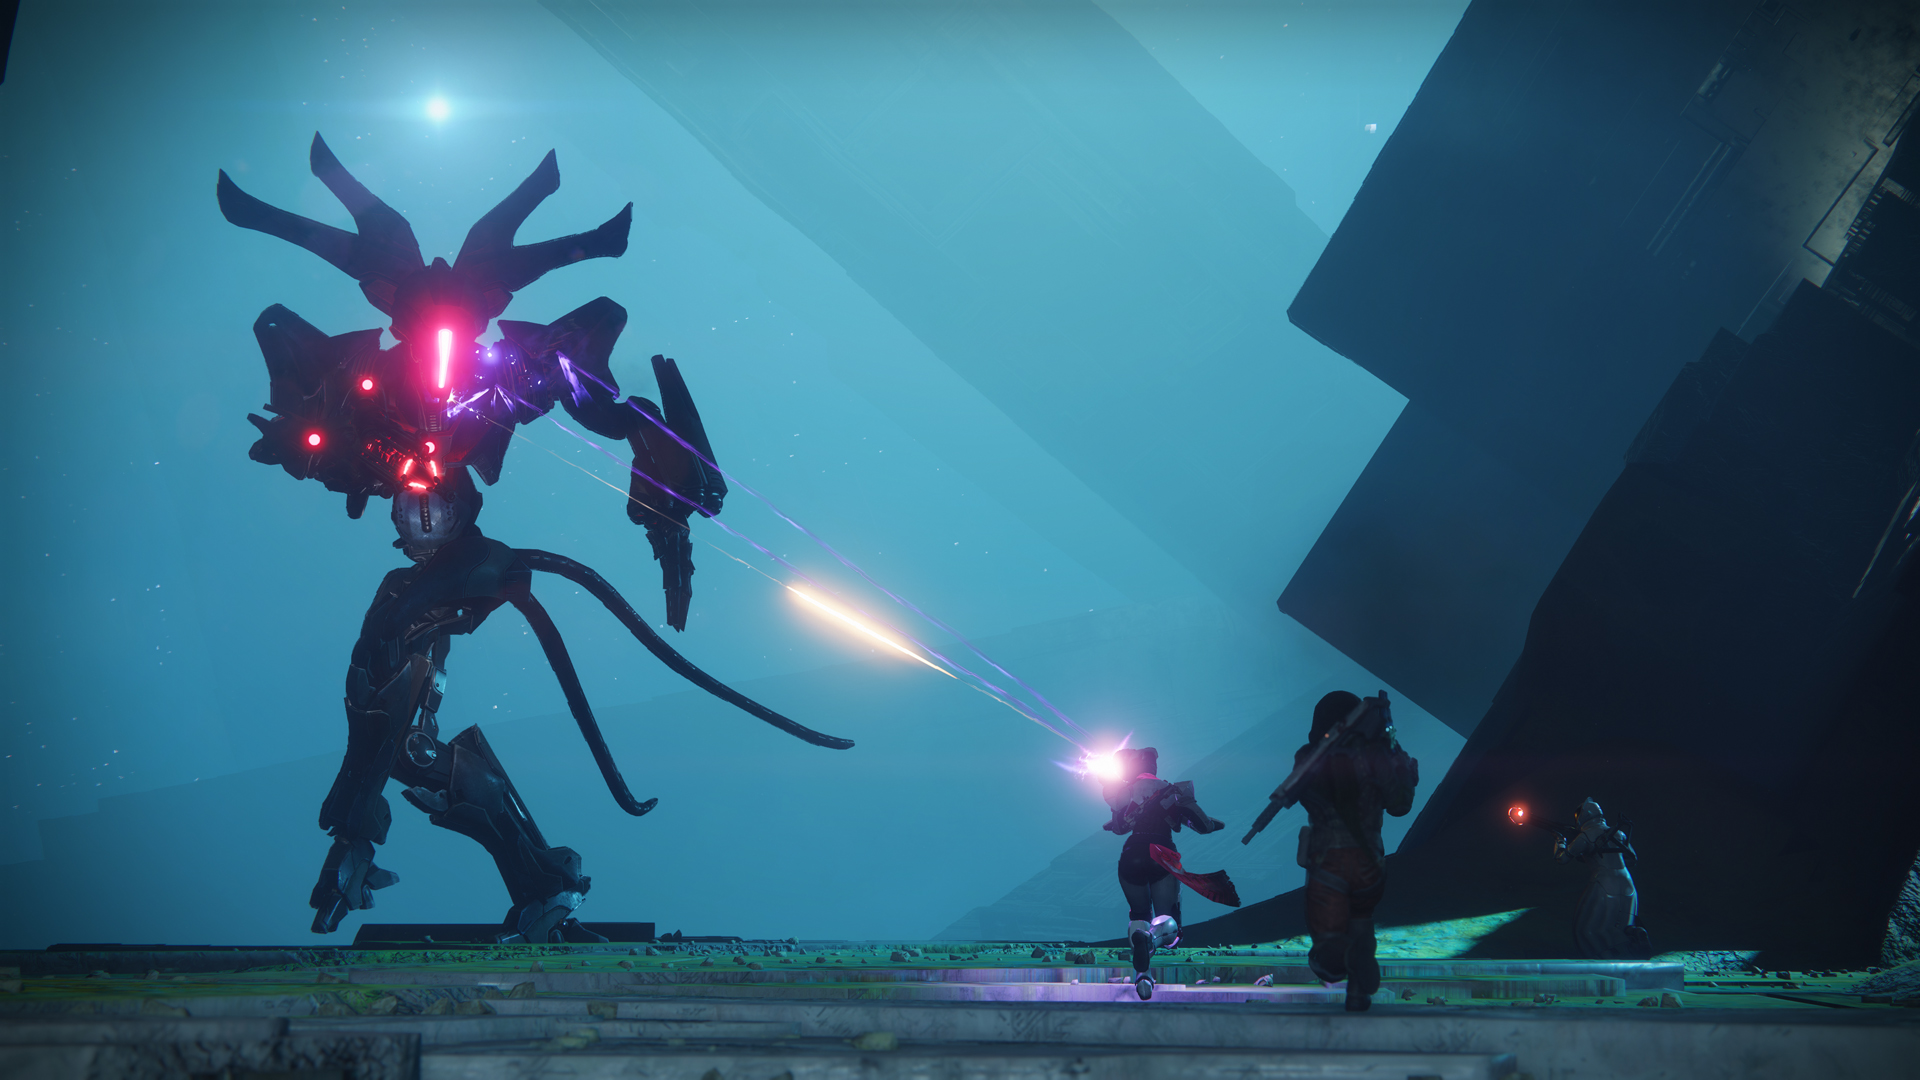 Activity Streaks in Destiny 2 Will Change the Game for Many